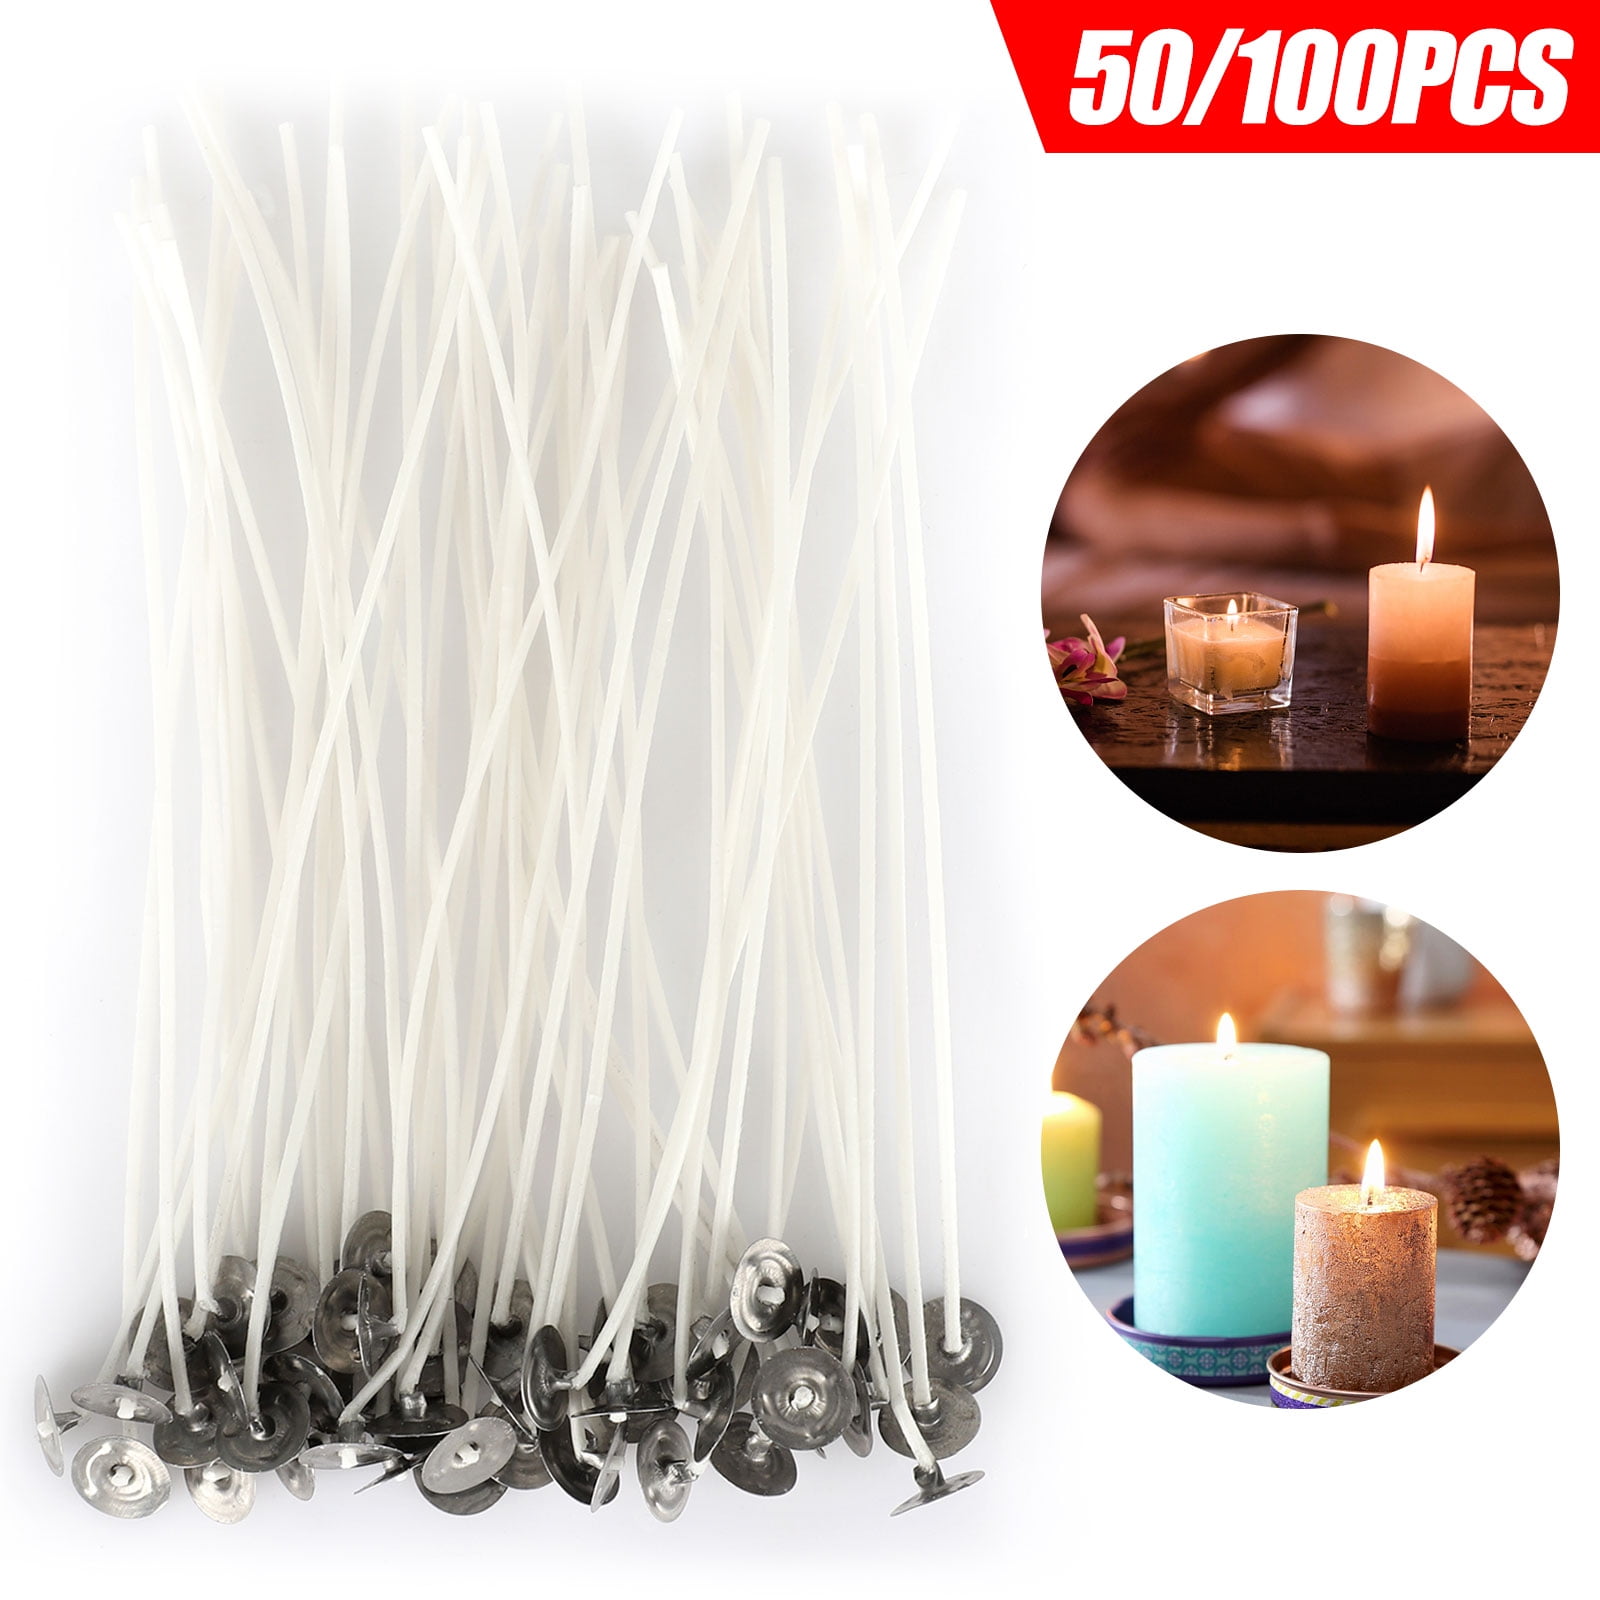 Pack-of-50-Cotton-Pre-Waxed-Wicks-with-Sustainers-for-Candle-Making-20cm Hot 